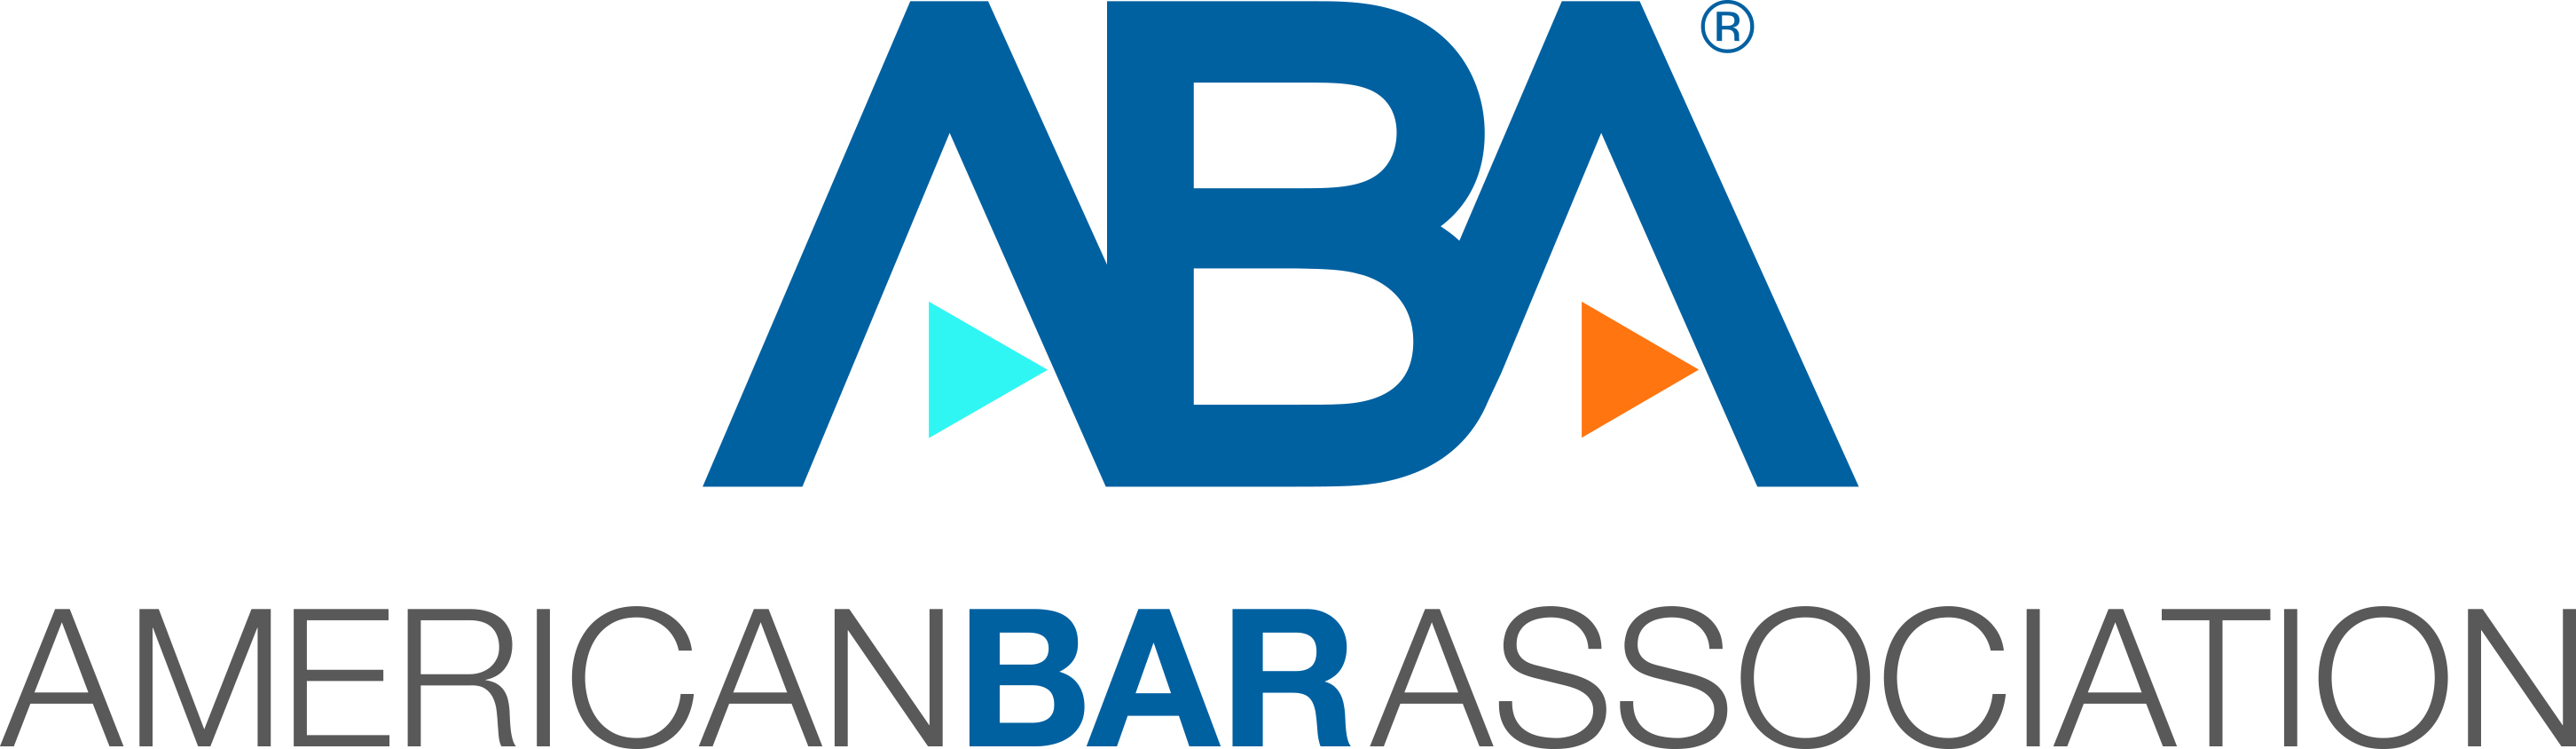 The logo for the American Bar Association.